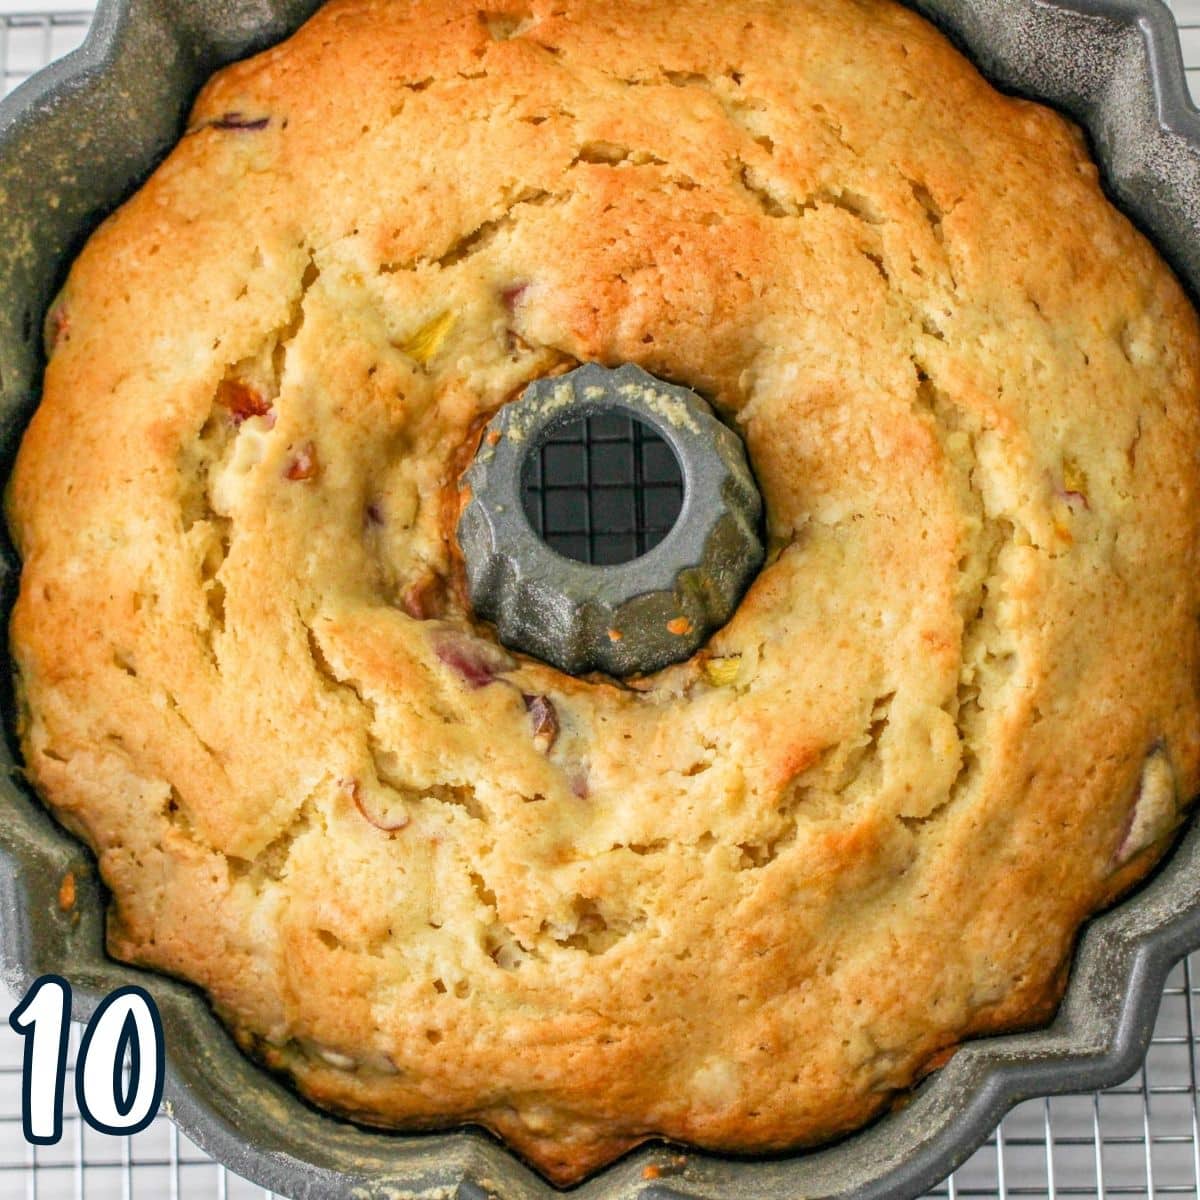 Just baked peach cake in a bundt cake pan. 